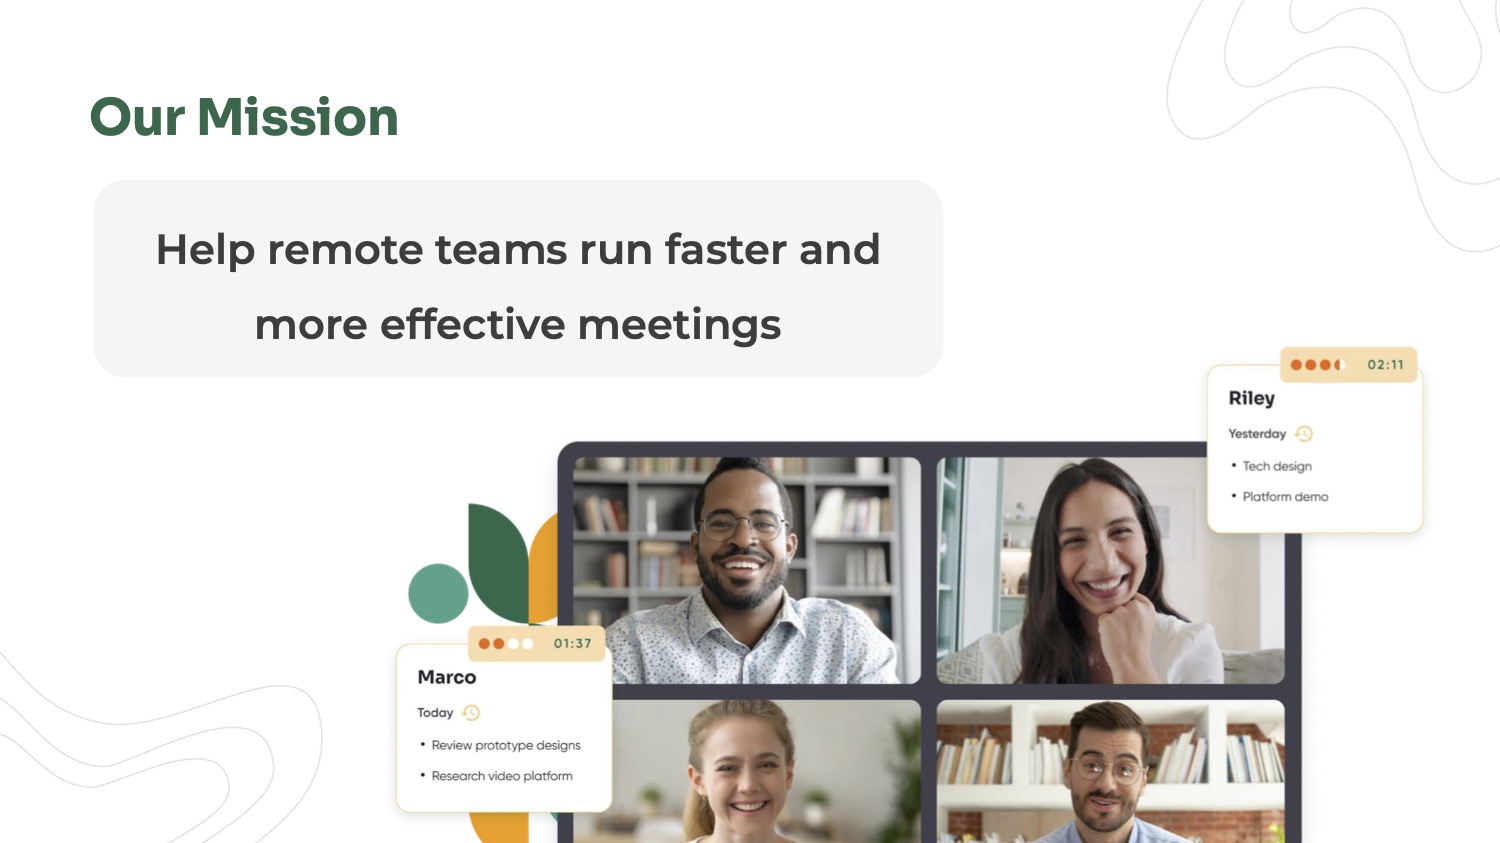 Slide reading "Help remote teams run faster and more effective meetings"